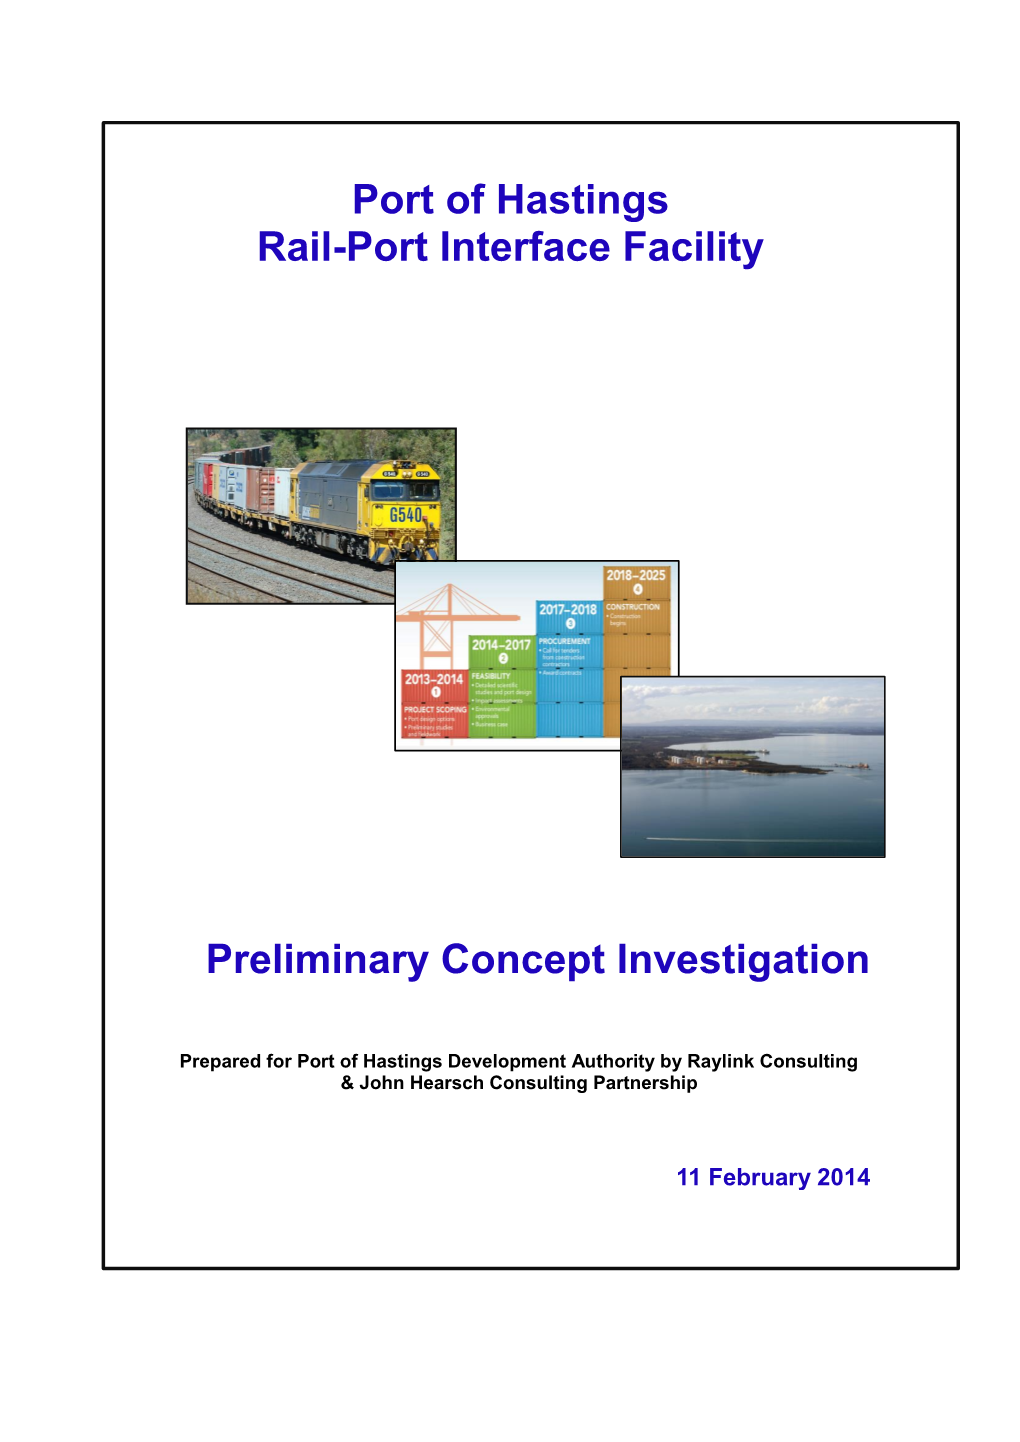 Port of Hastings Rail-Port Interface Facility